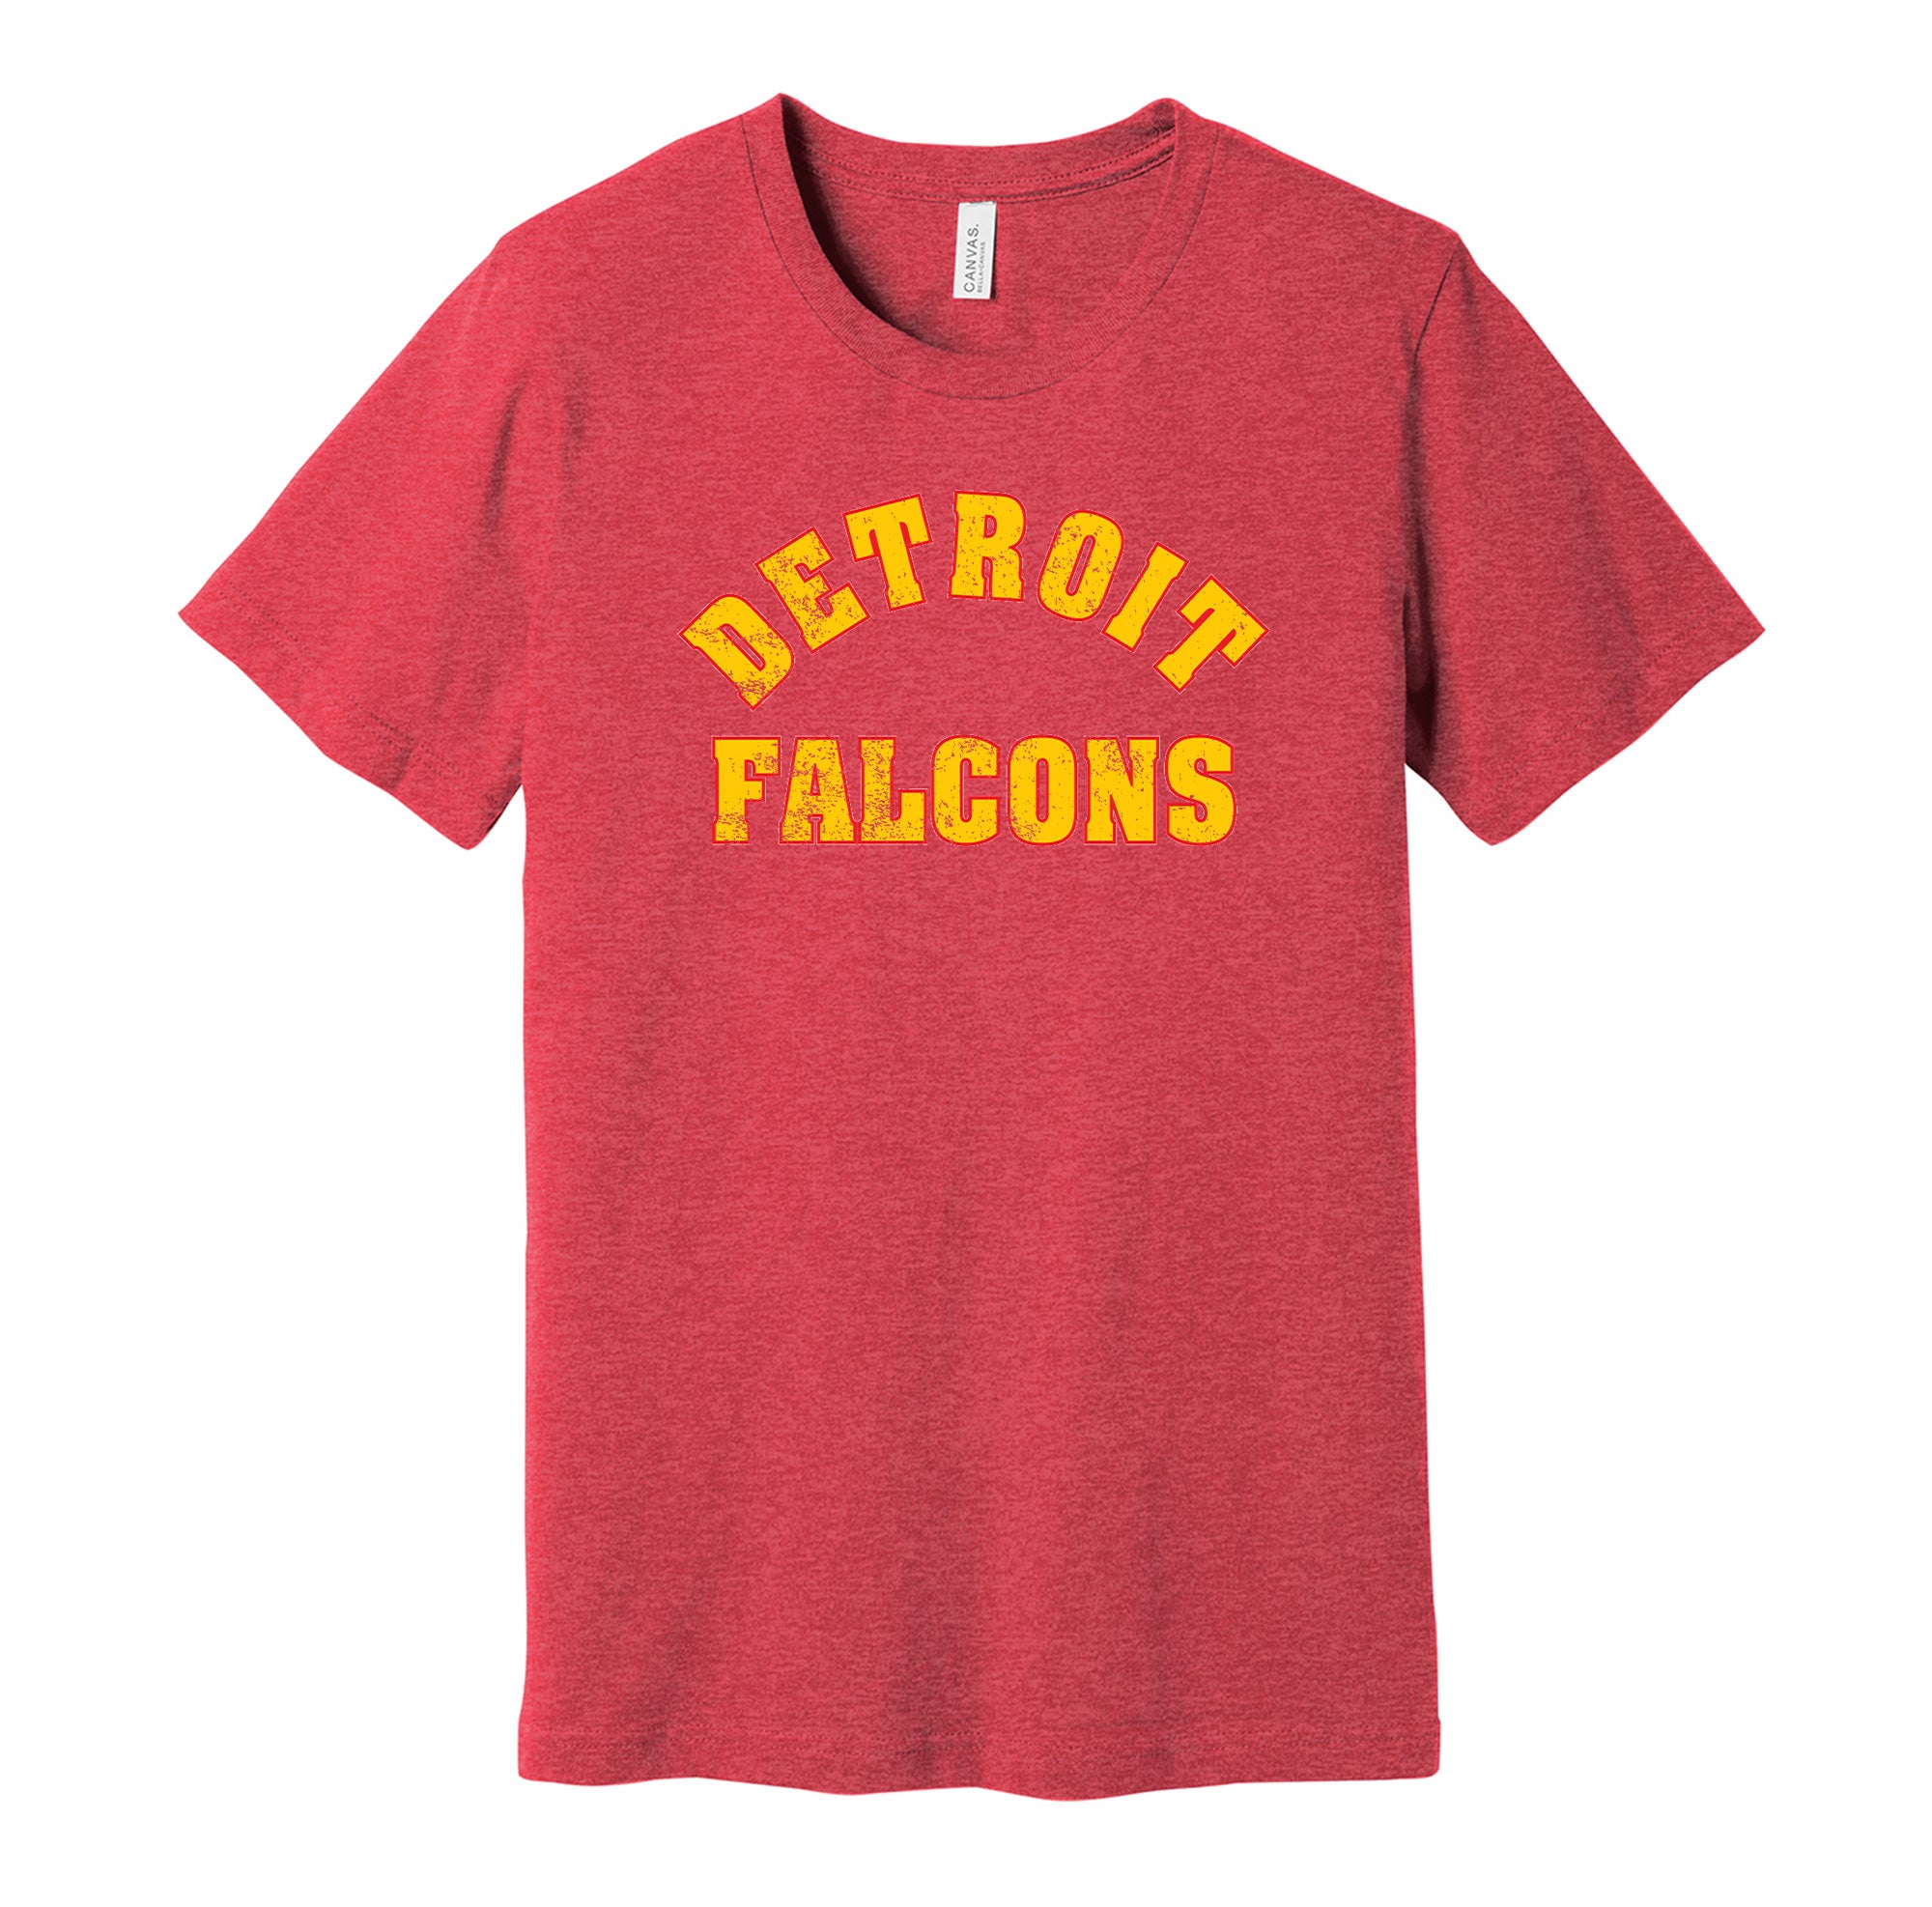 Detroit Falcons 1930s Distressed Logo - Defunct Hockey Team Shirt - Celebrate Michigan Sports Heritage and History - Hyper Than Hype Shirts S / Red